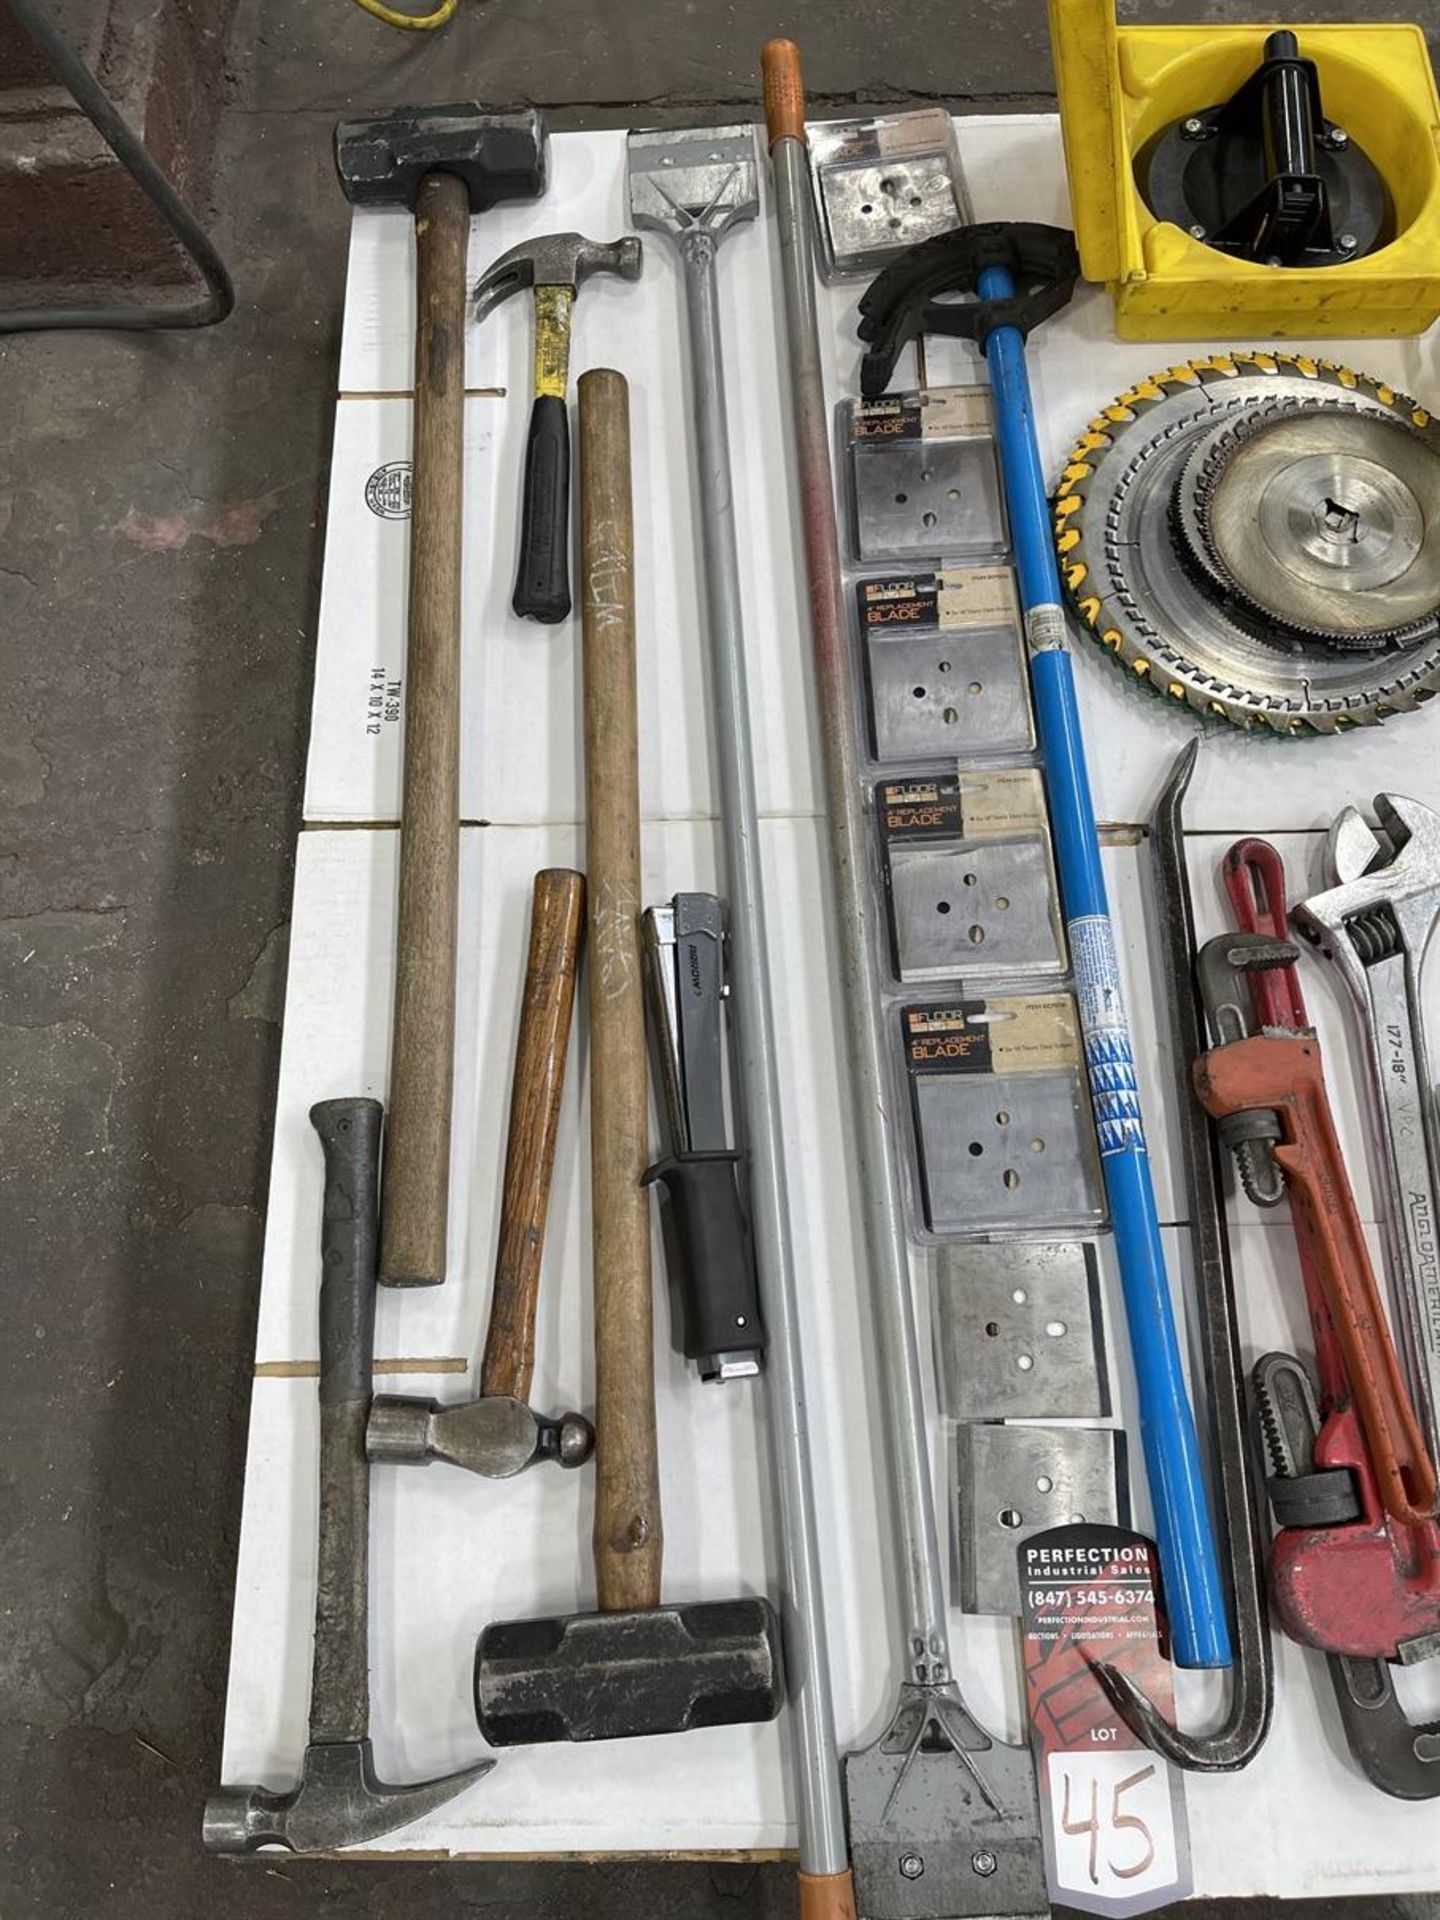 Lot Comprising Hammers, Scrapers, Suction Cups, Tube Bender, Pipe Wrenches and Tape Measures - Image 2 of 3